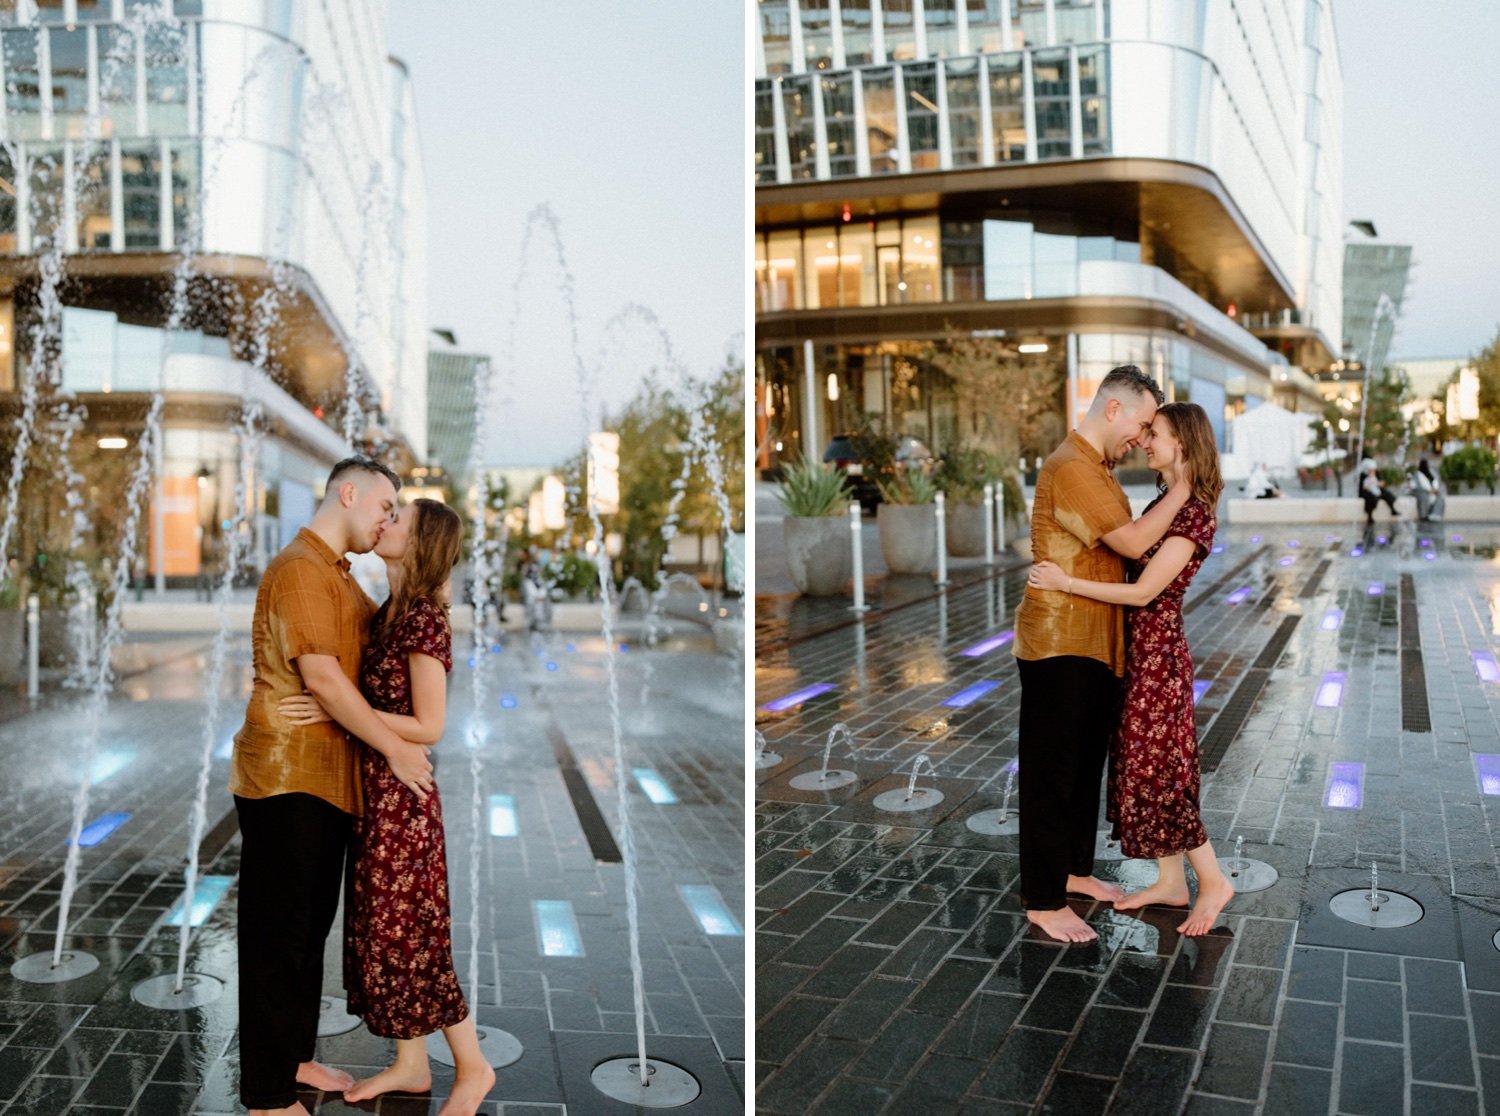 29_The Wharf Engagement Session - Fun - Fountain-269_The Wharf Engagement Session - Fun - Fountain-263_The Wharf Engagement Session in the fountain.jpg